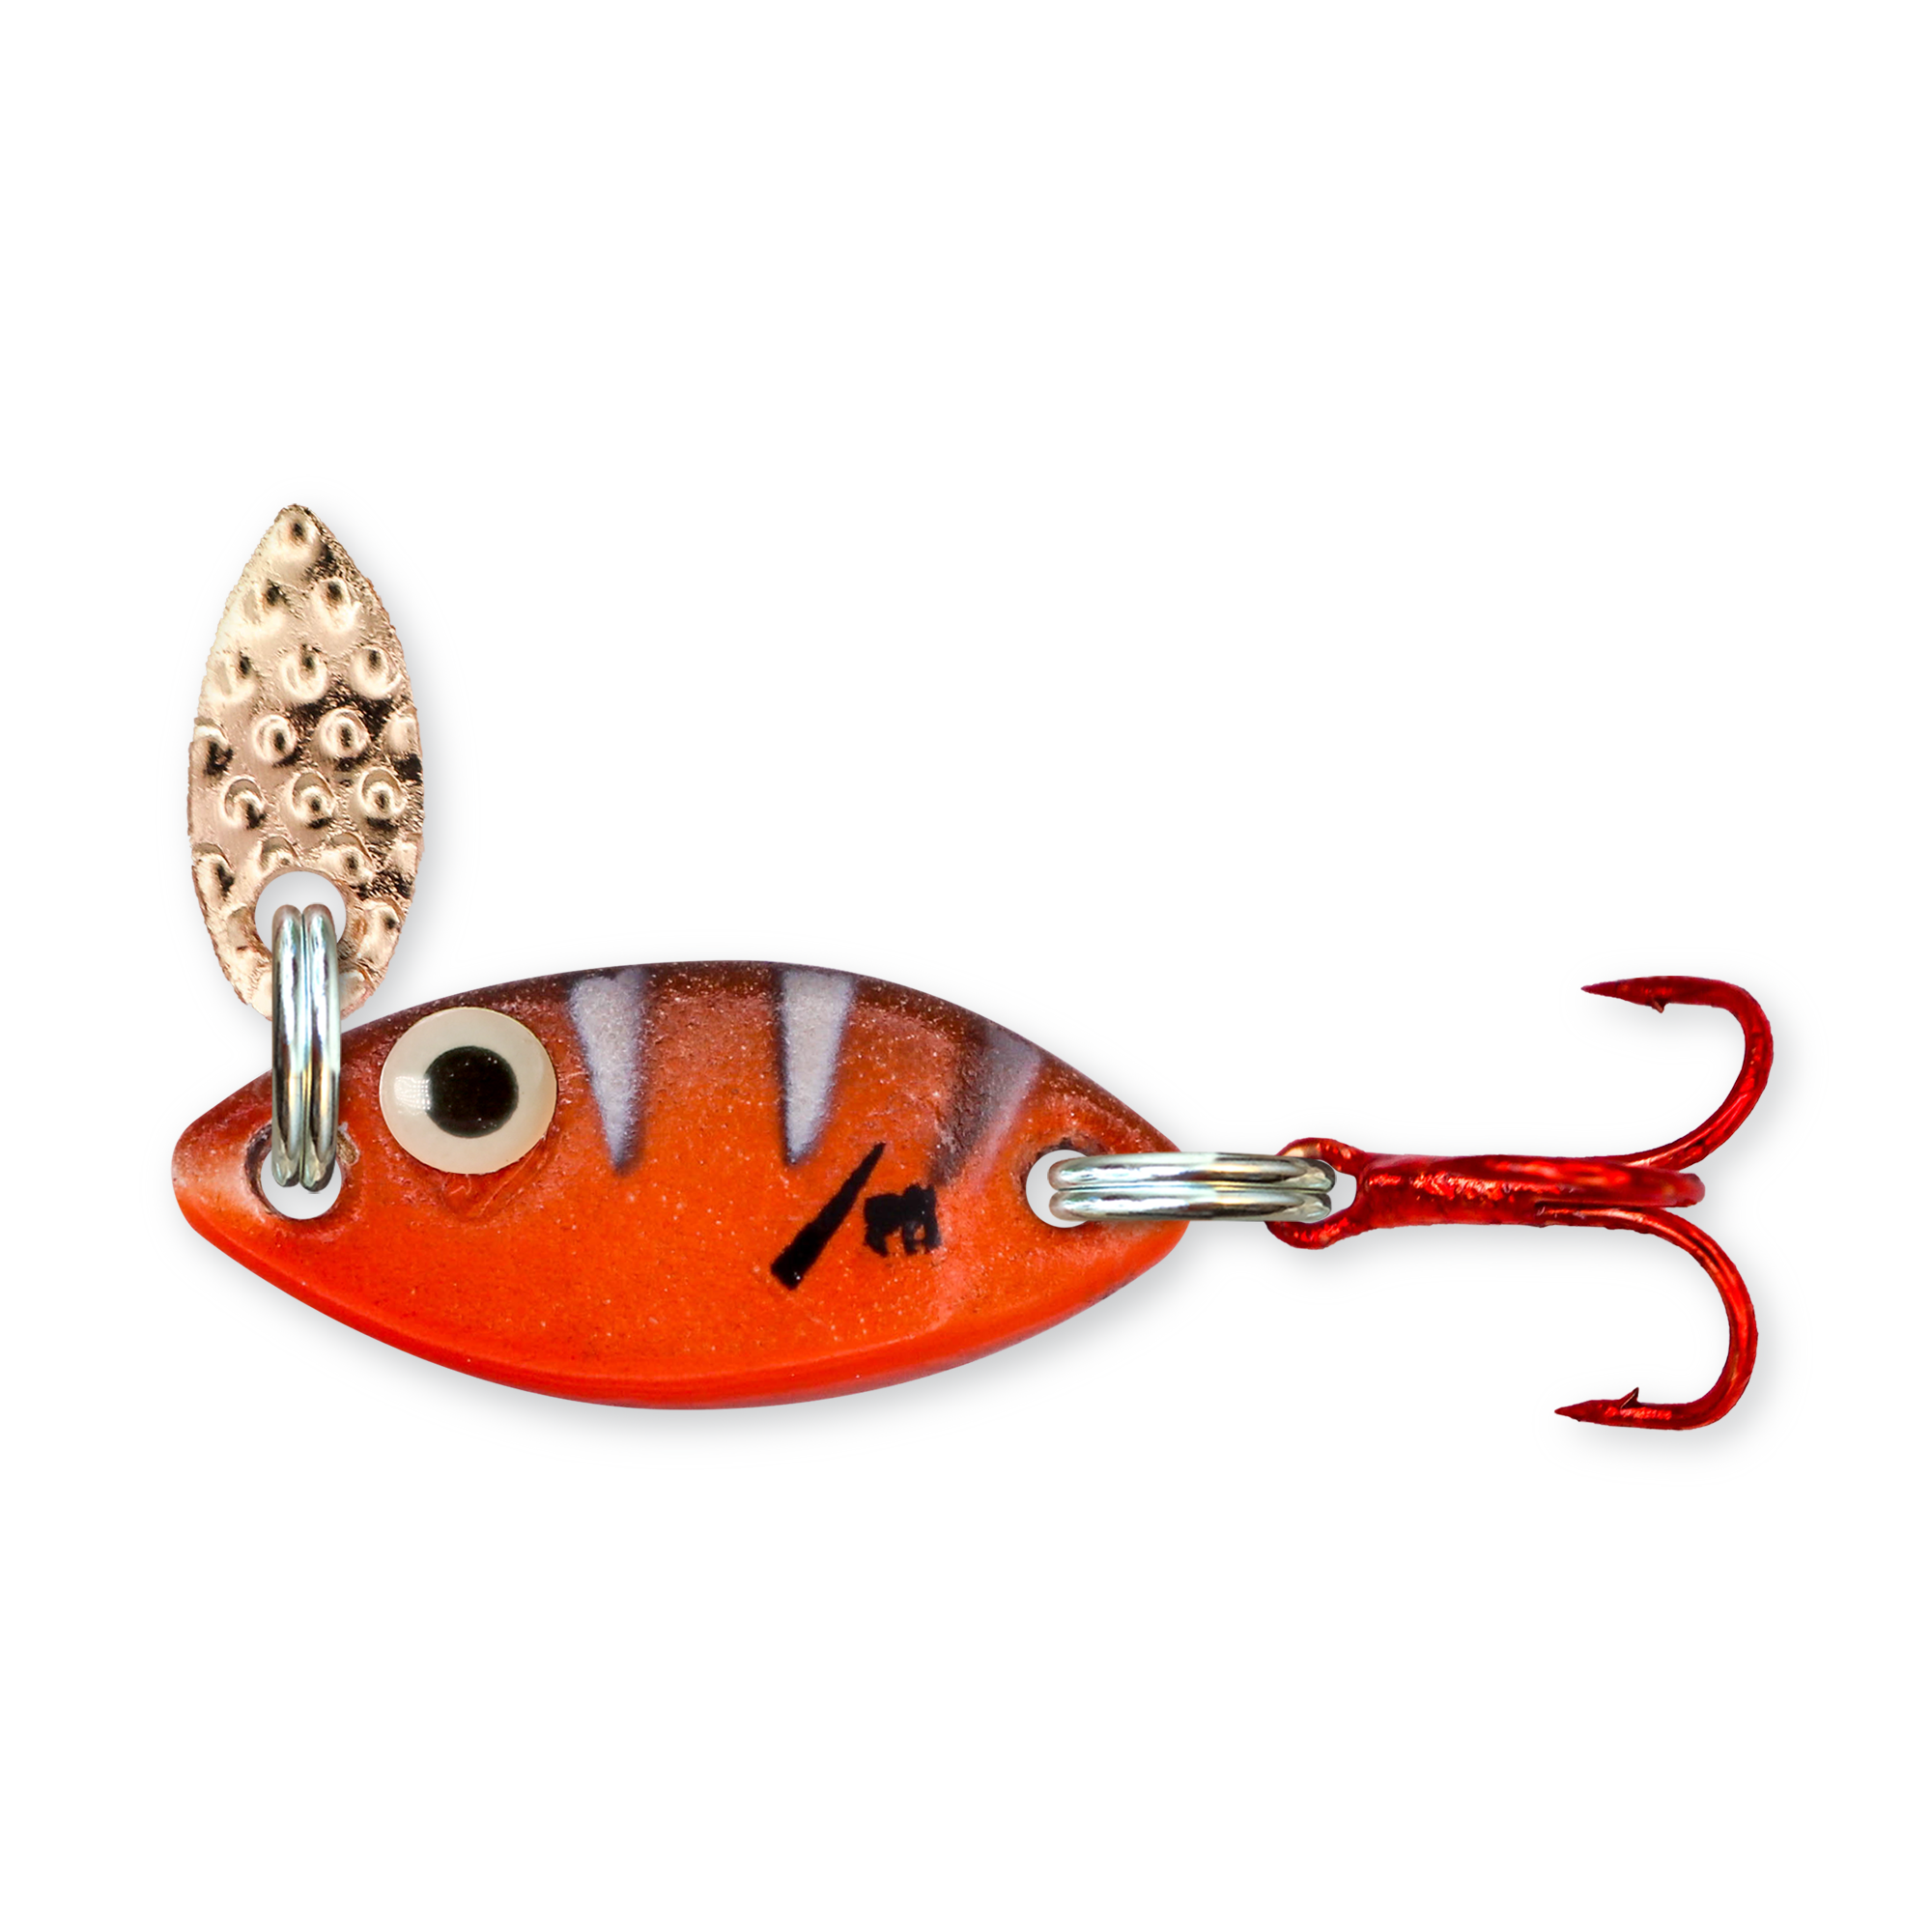 Patriot Star Pattern Spoon Lure by Parsons Lures